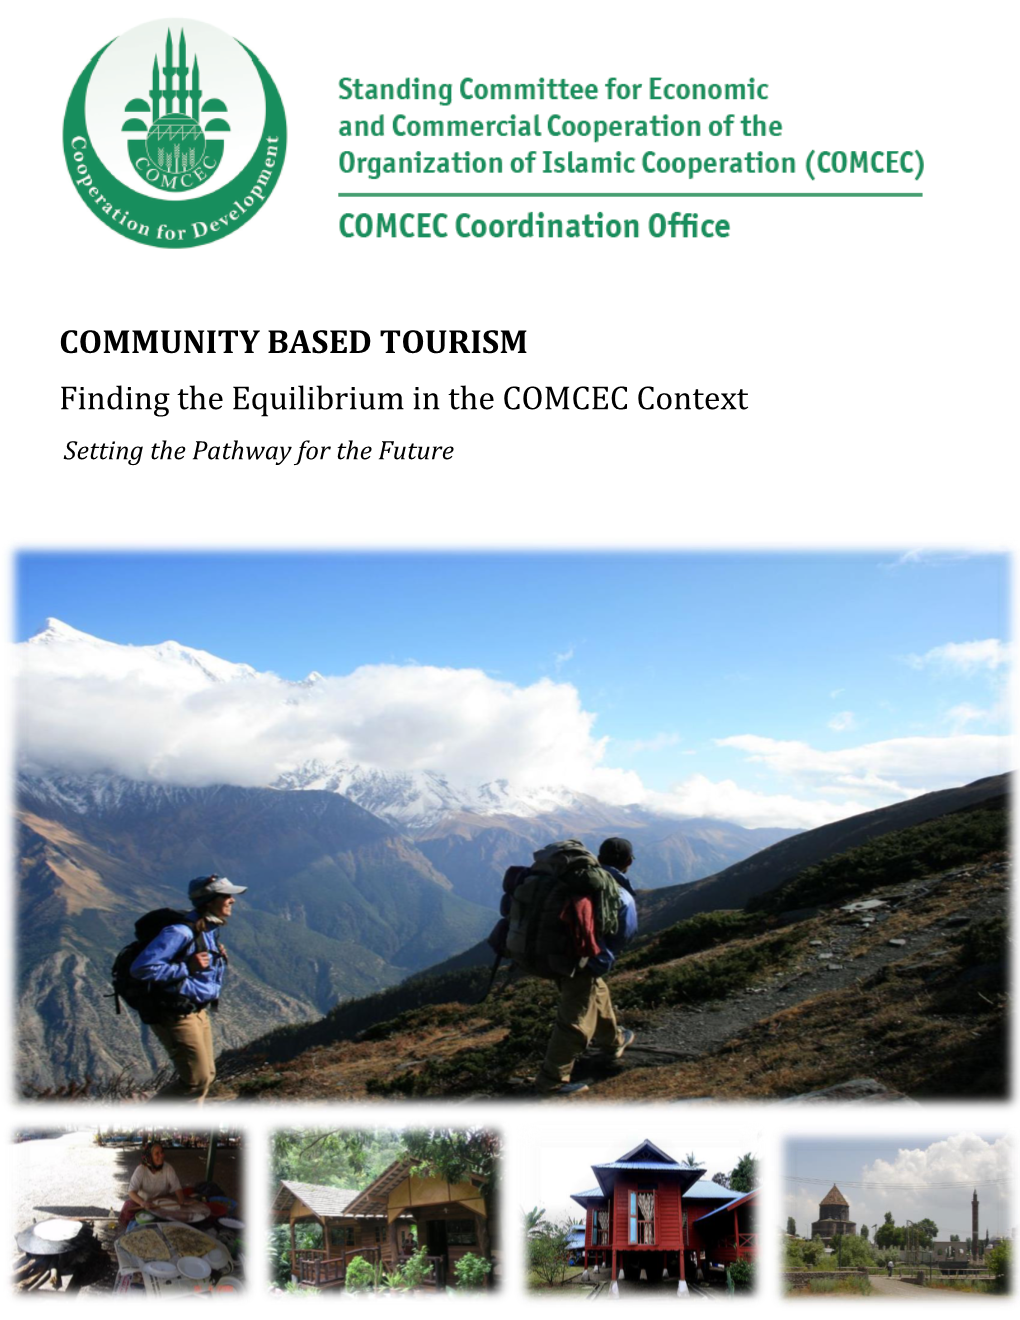 Community Based Tourism Finding the Equilibrium in the COMCEC Context